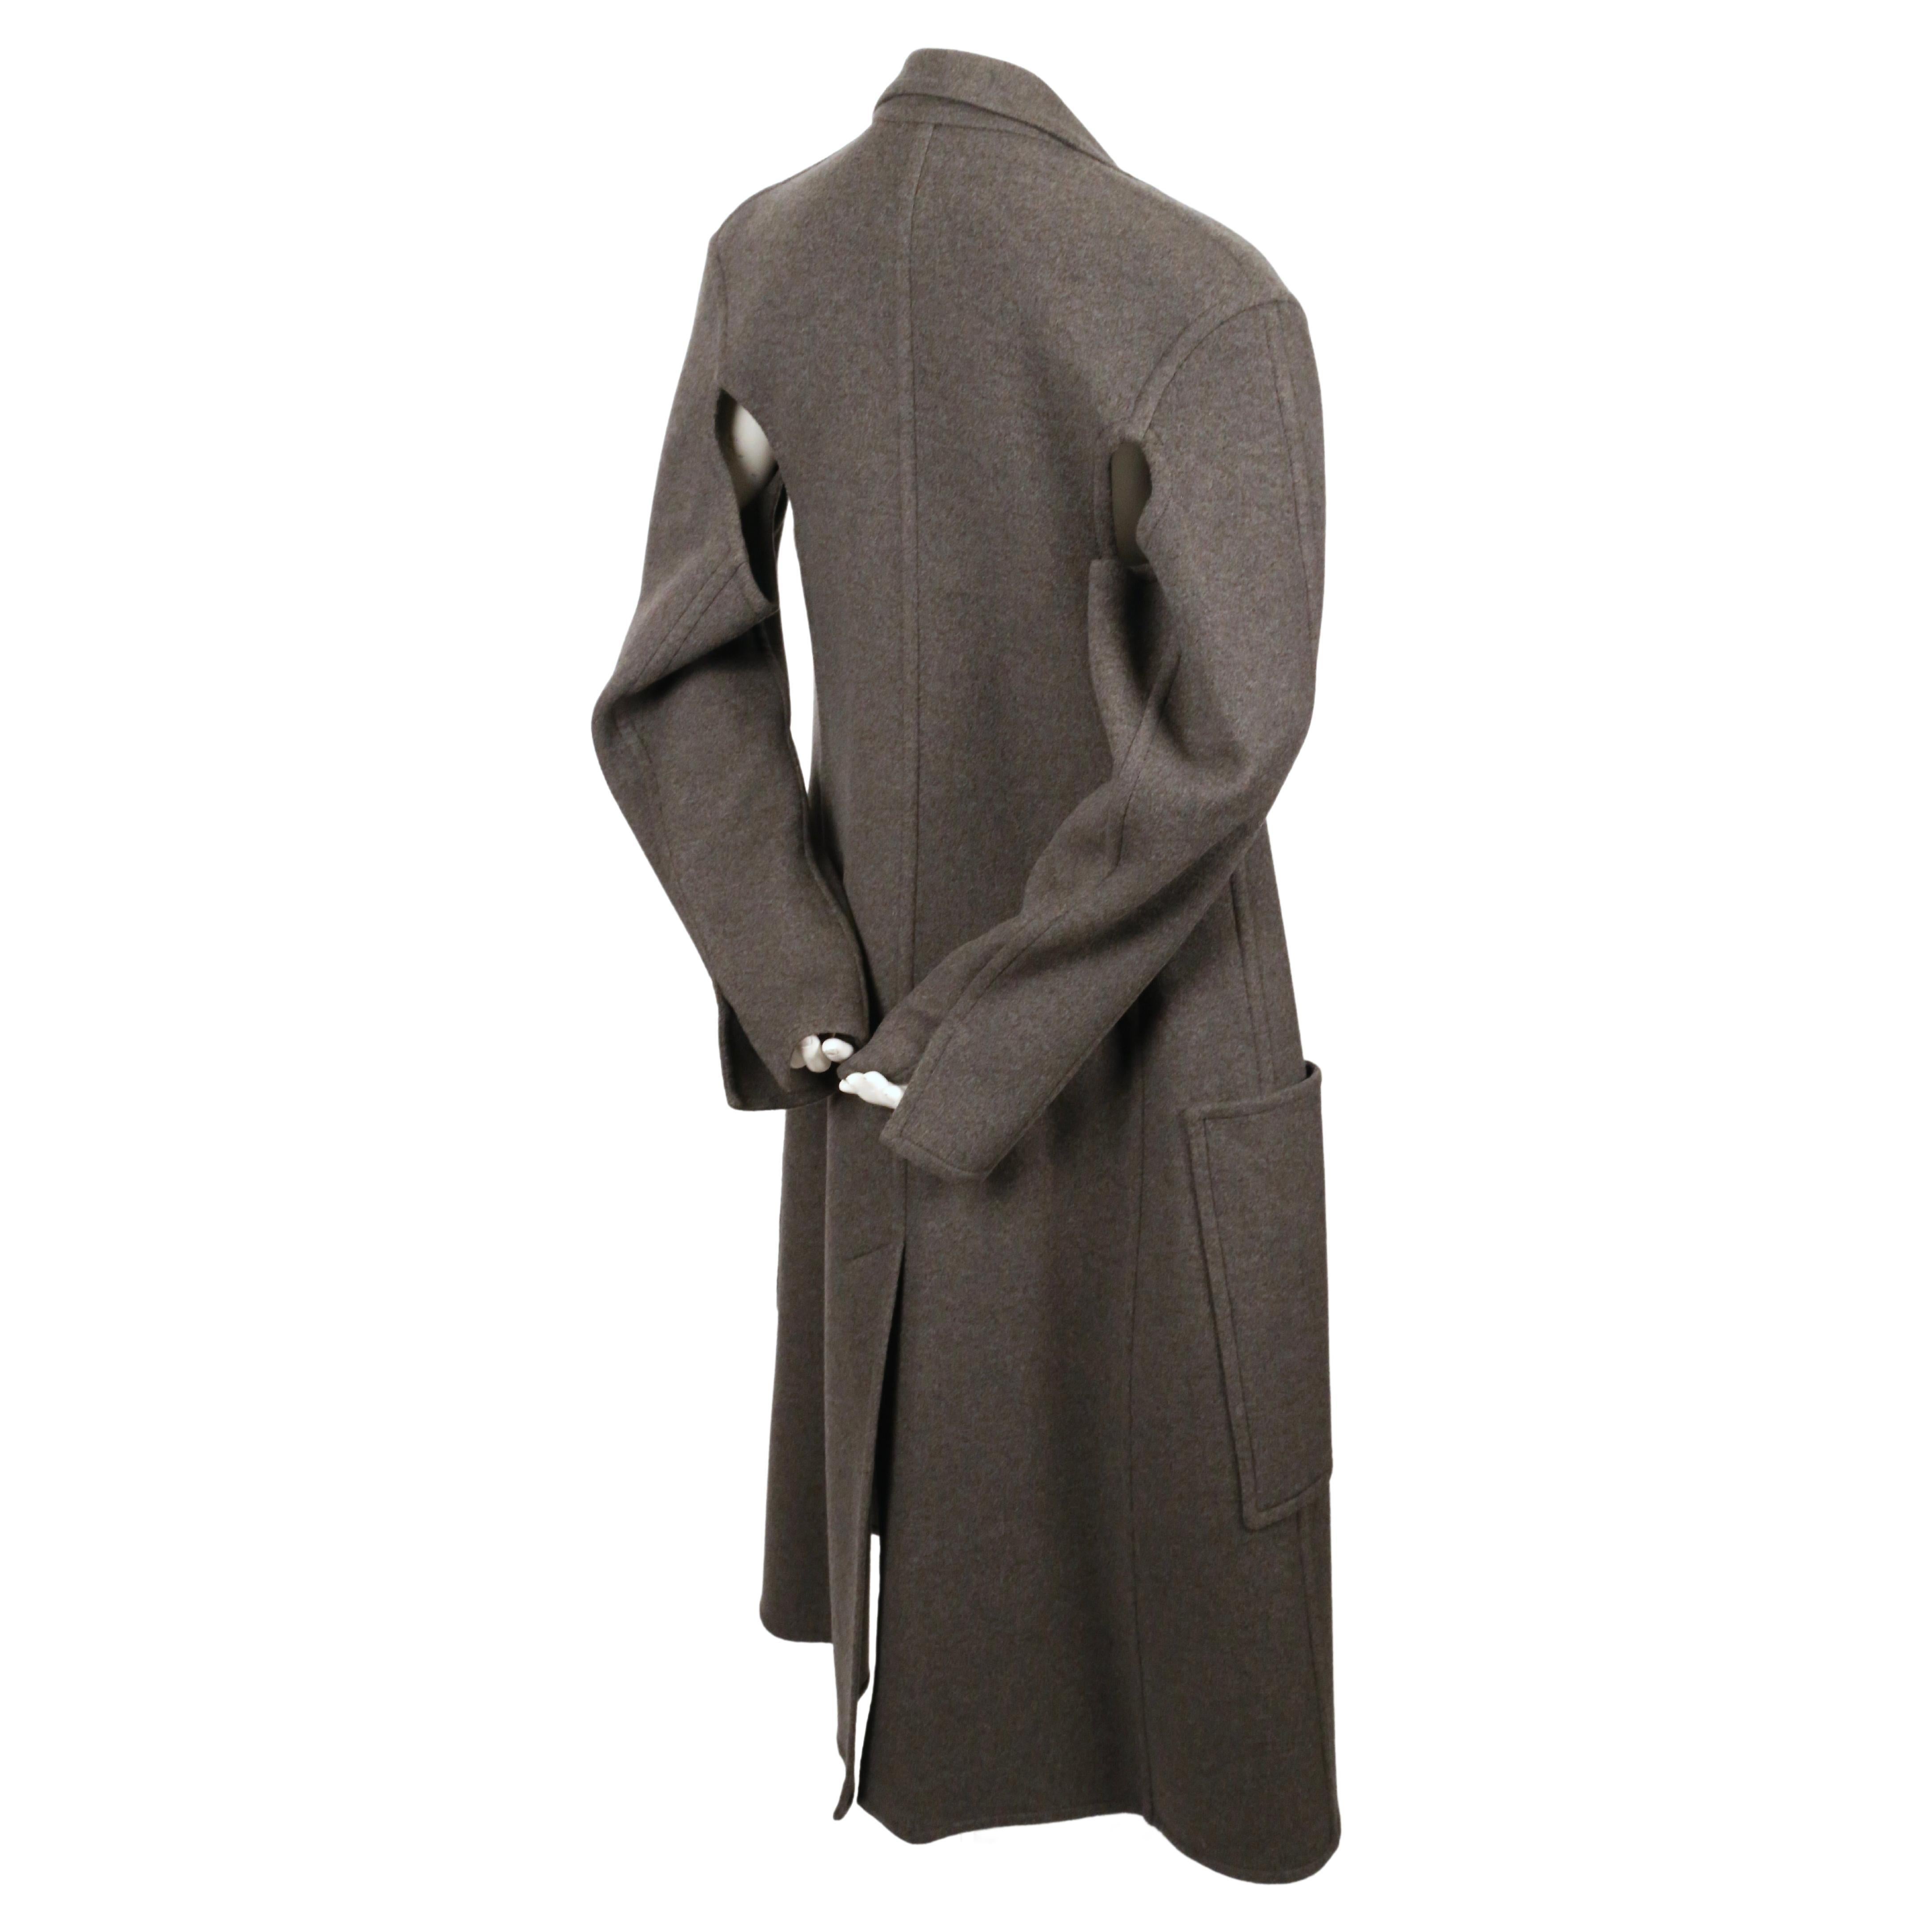 Celine by Phoebe Philo heathered grey cashmere coat with cutouts & wrap pockets For Sale 1